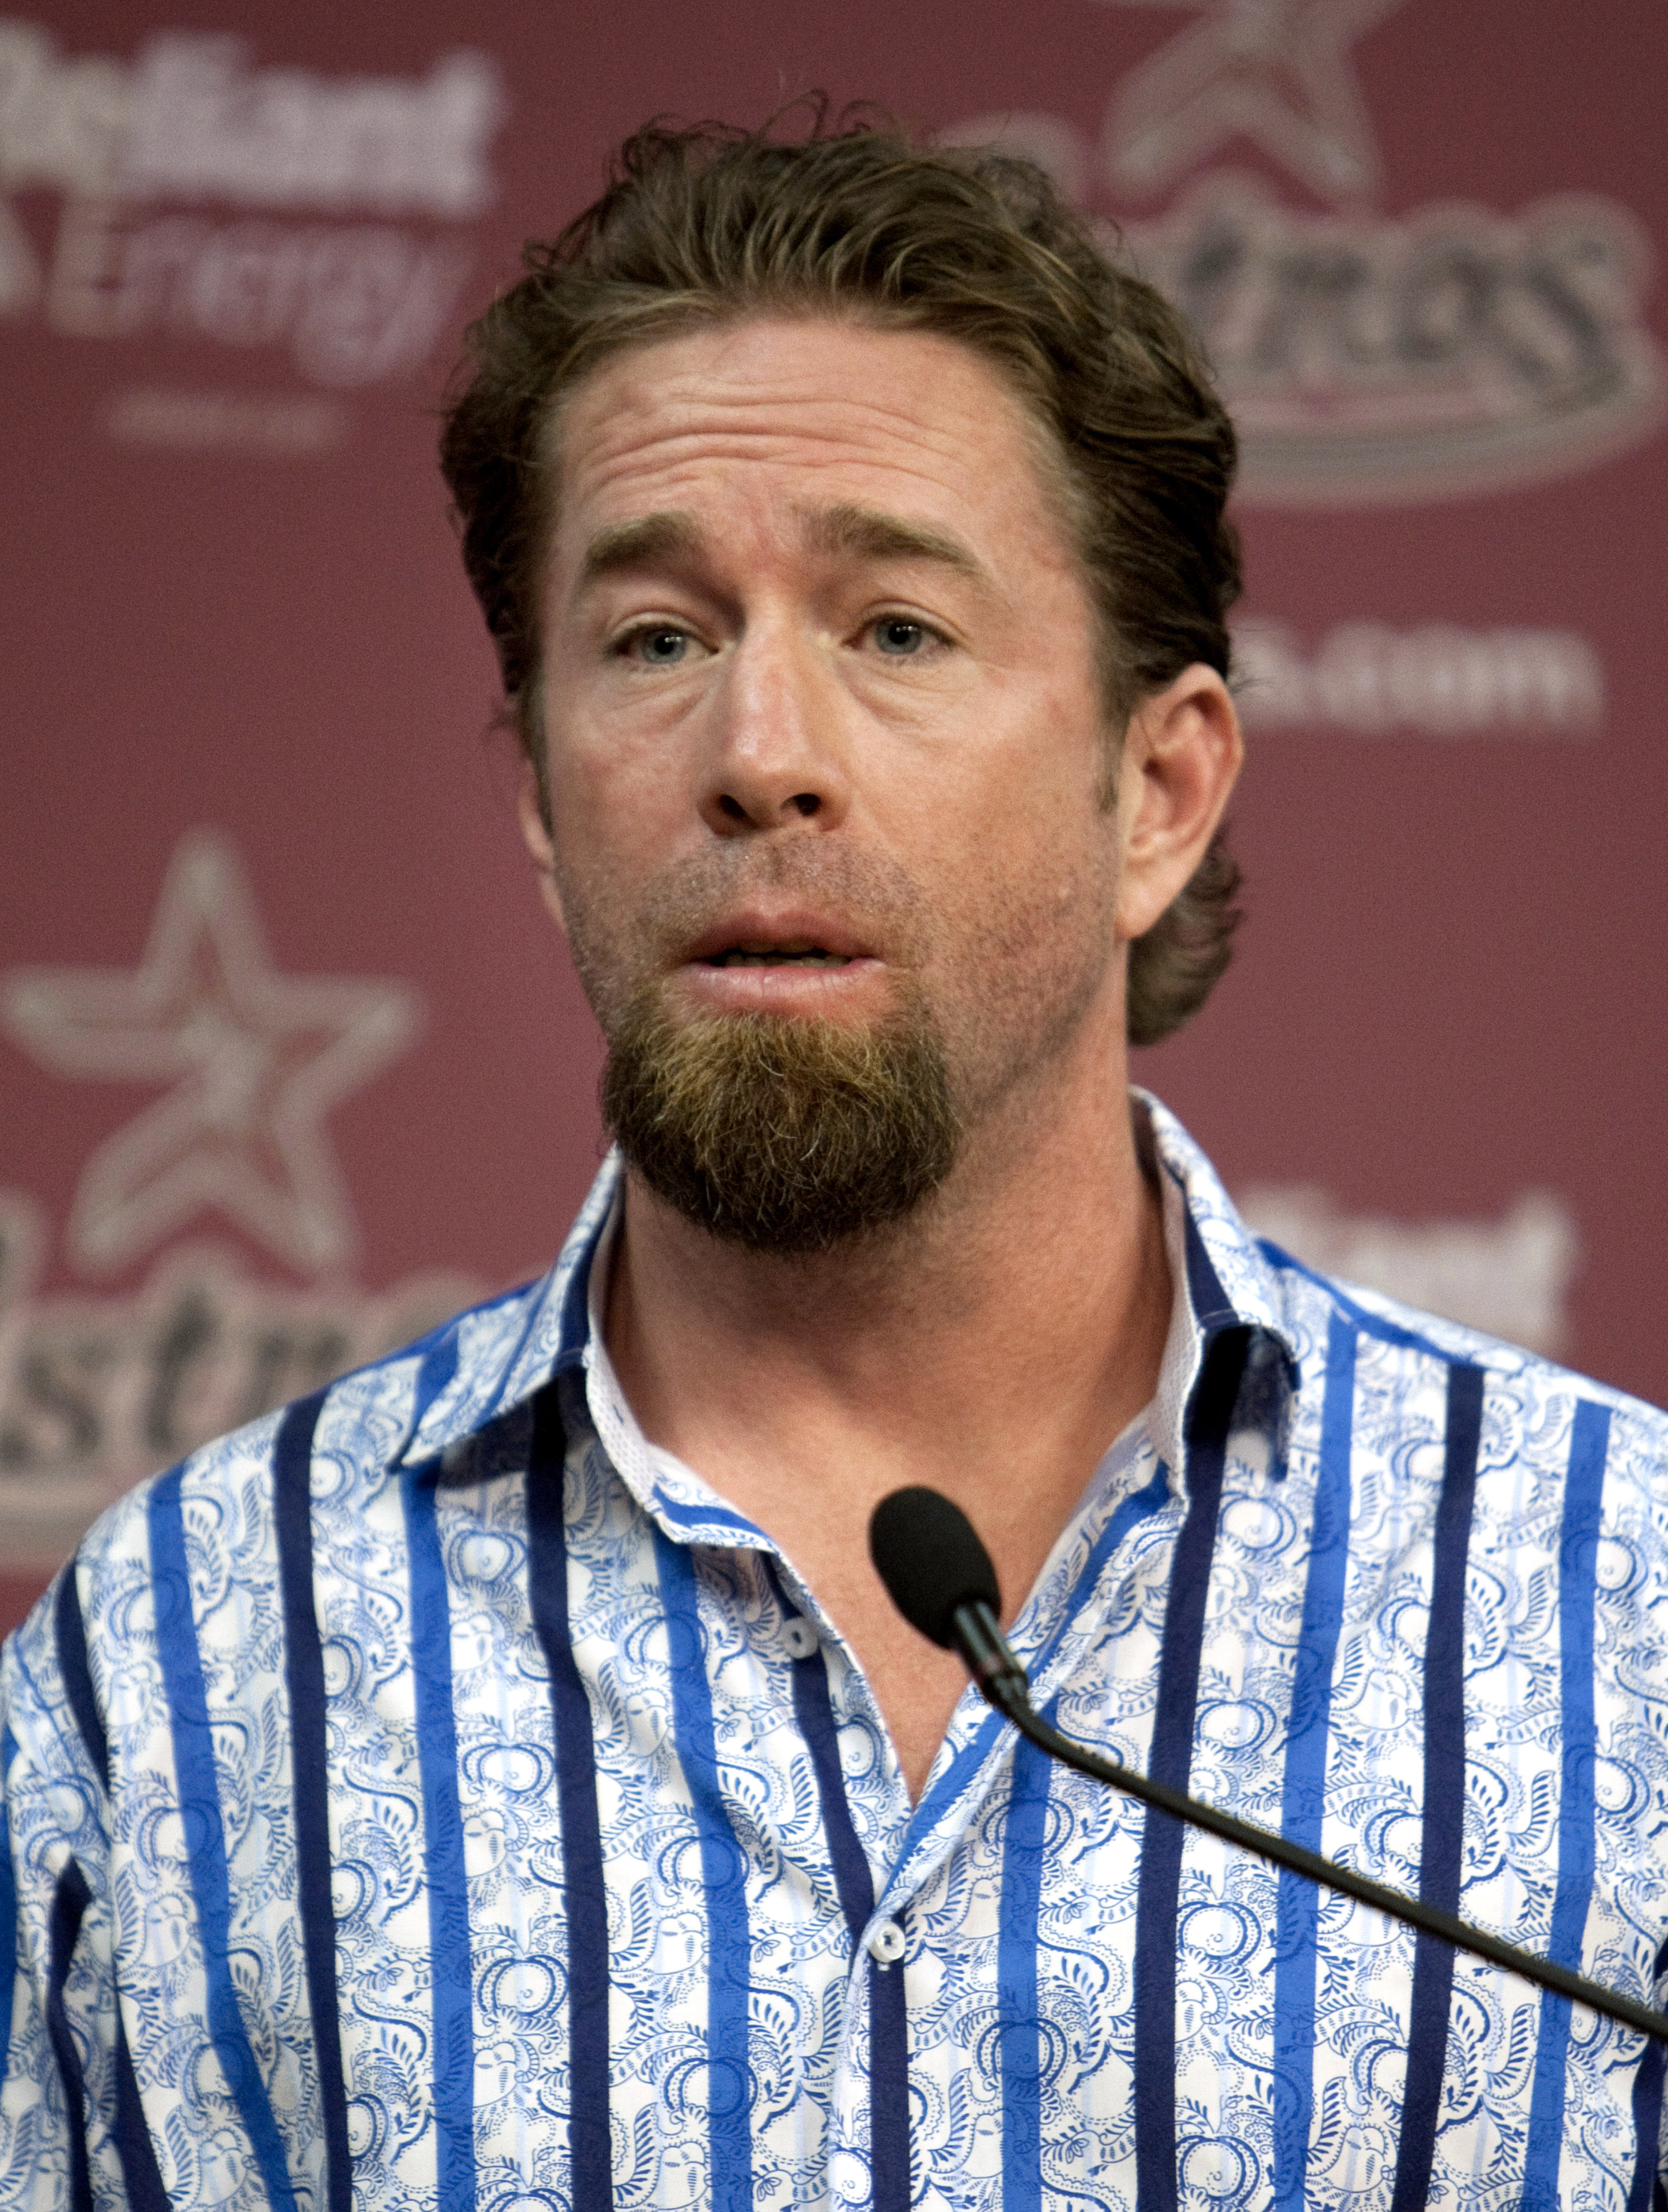 HOUSTON - JULY 11:  Jeff Bagwell, former Houston Astros first baseman, addresses the media after being named hitting coach at Minute Maid Park on July 11, 2010 in Houston, Texas. Bagwell is replacing Sean Berry and will start after the All-Star break.  (P